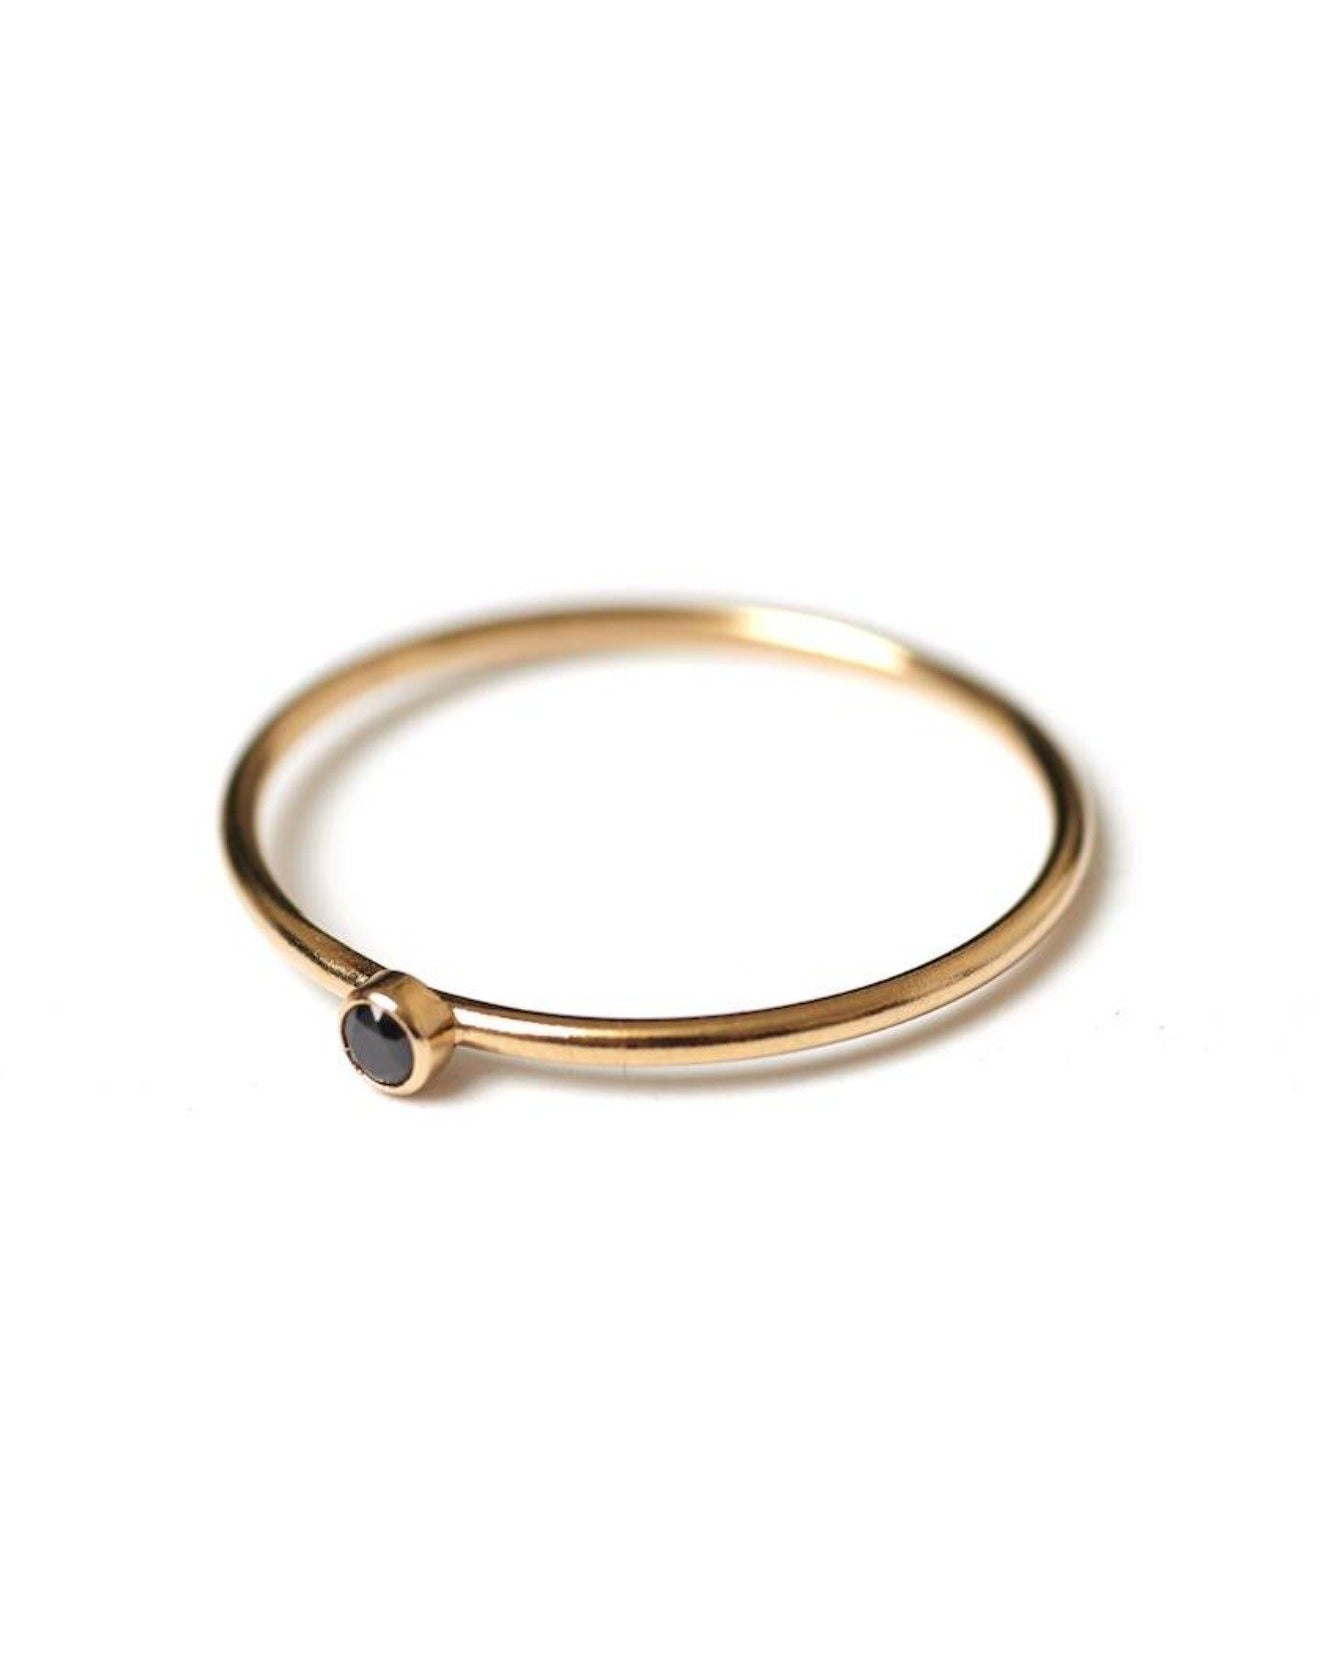 Dia Black Ring by KOZAKH. A 1mm thick ring, crafted in 14K Gold Filled, featuring a 2mm black Spinel bezel.